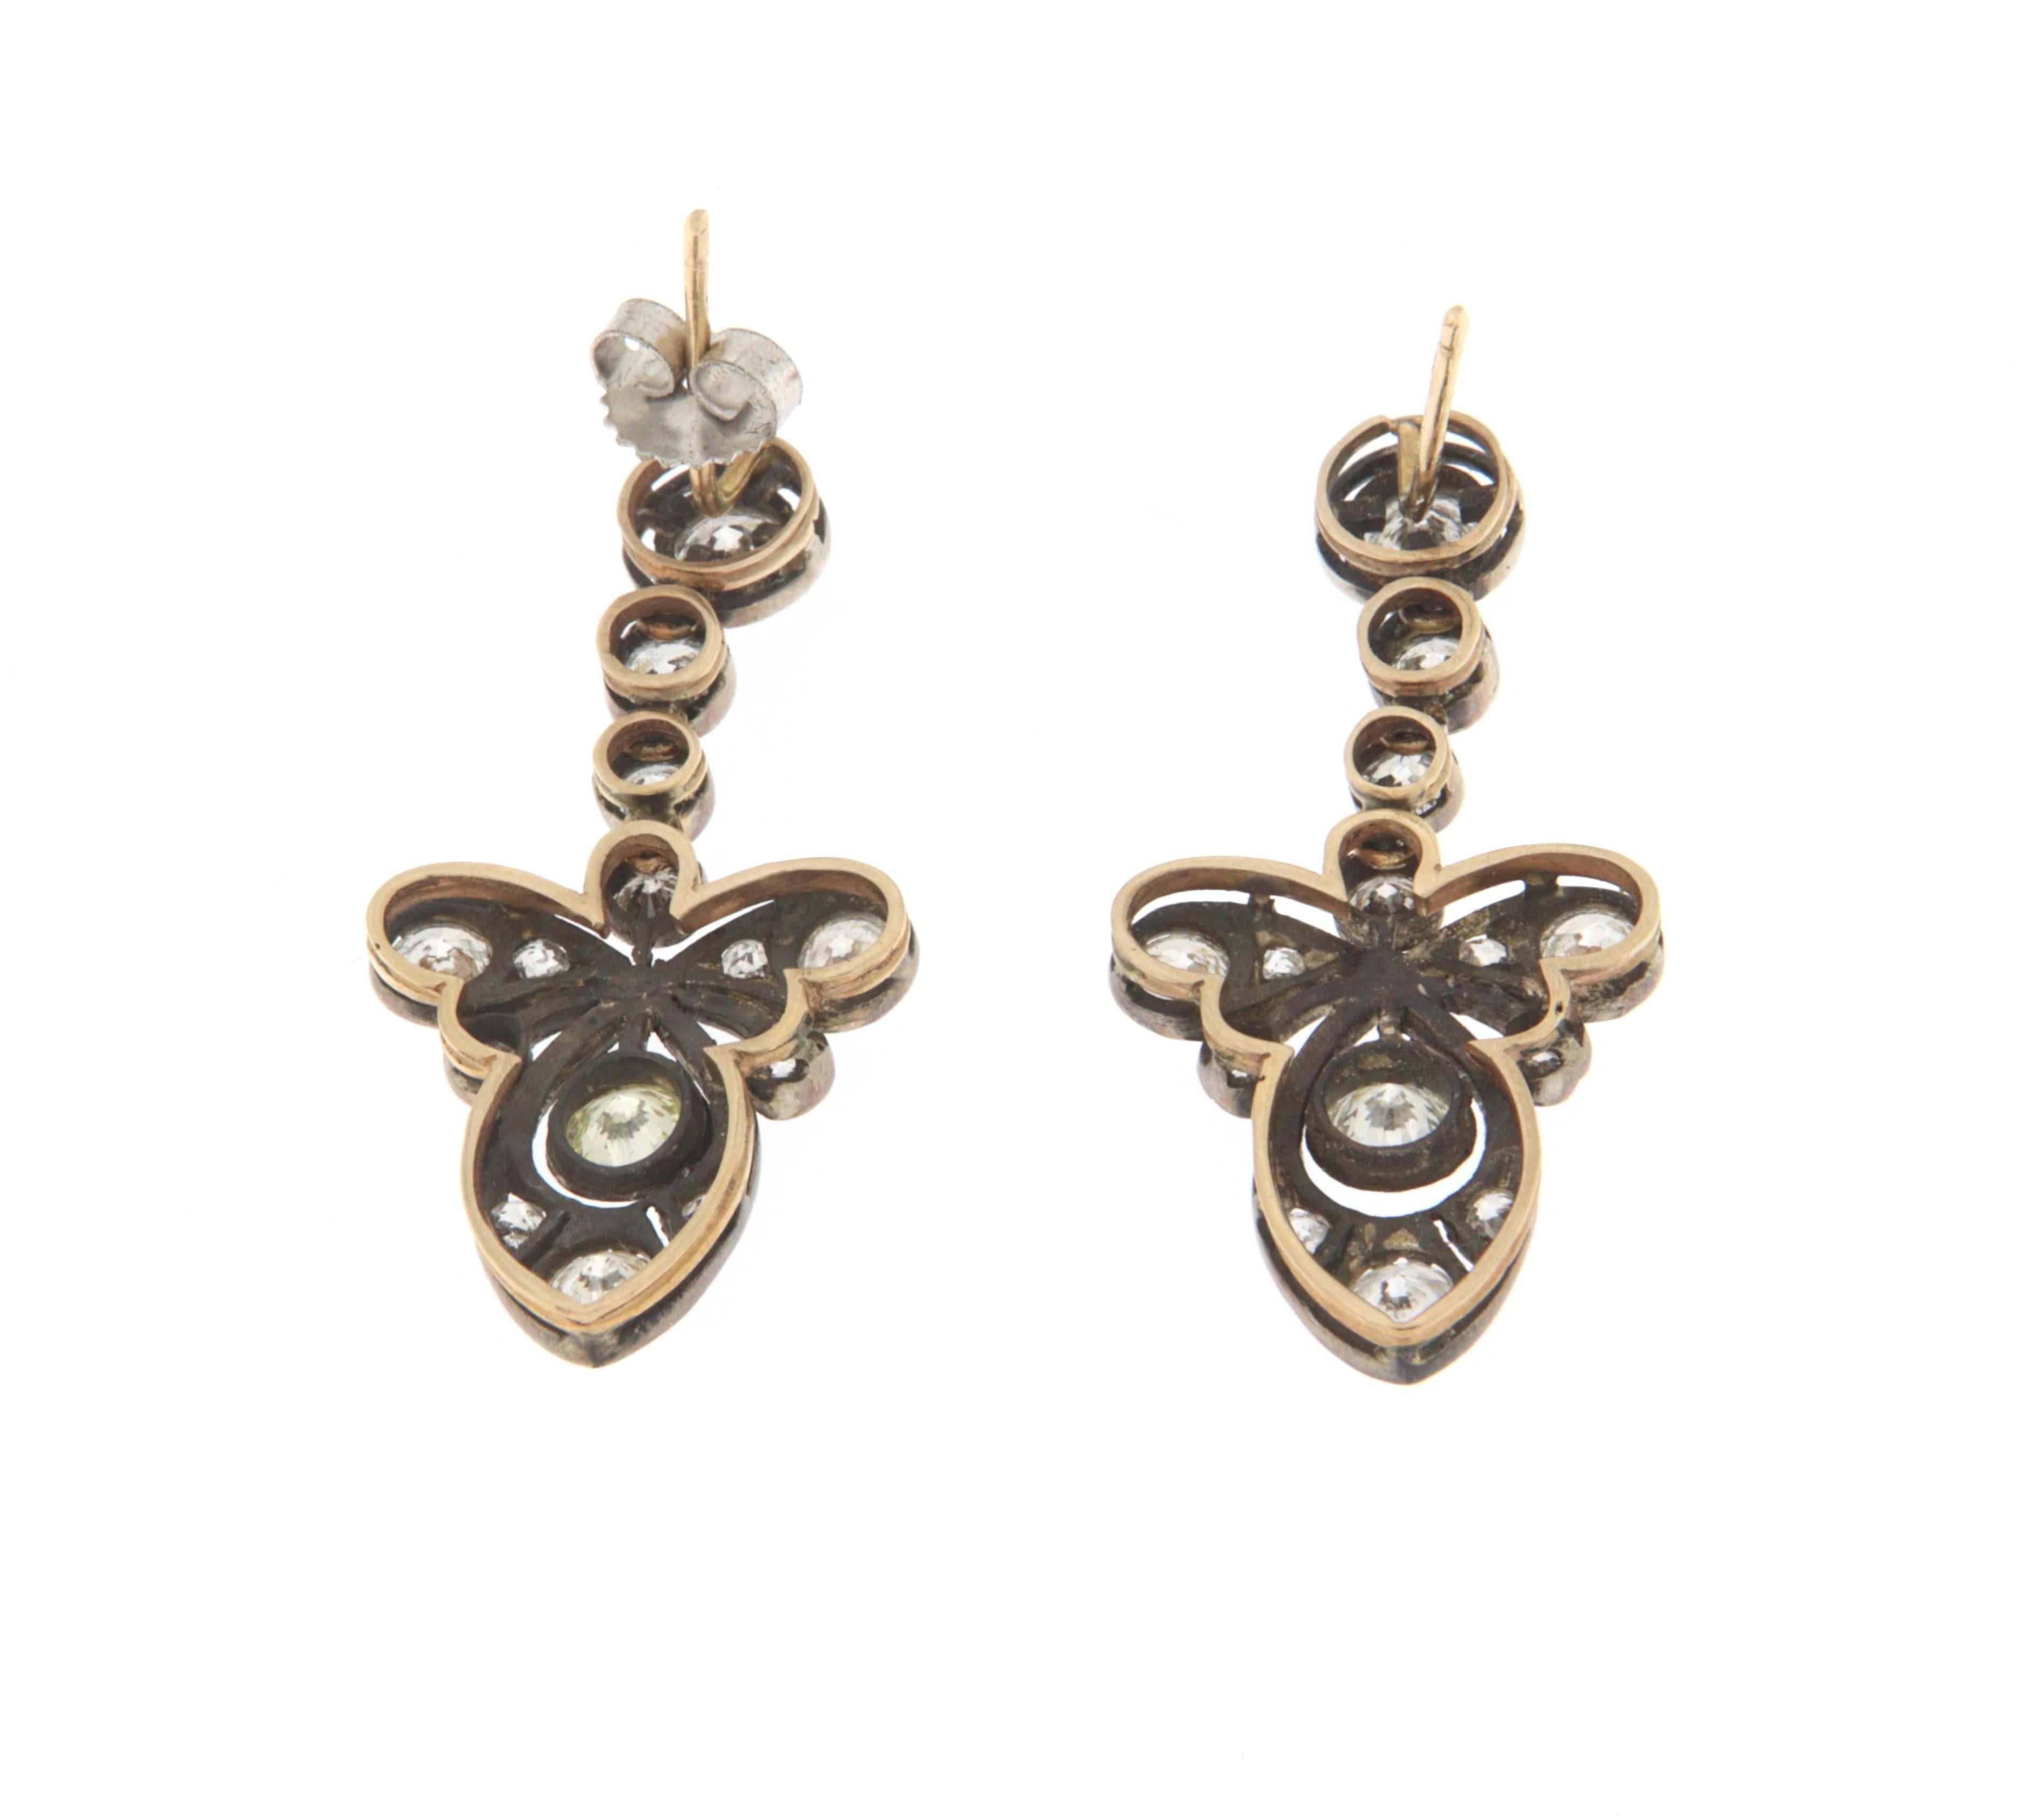 Spectacular earring made on the ancient style that fully conveys the flavor of the past Victorian era, made by Neapolitan goldsmiths in 14-karat yellow gold in the back and silver in the upper part.
There are set diamonds of different sizes for a